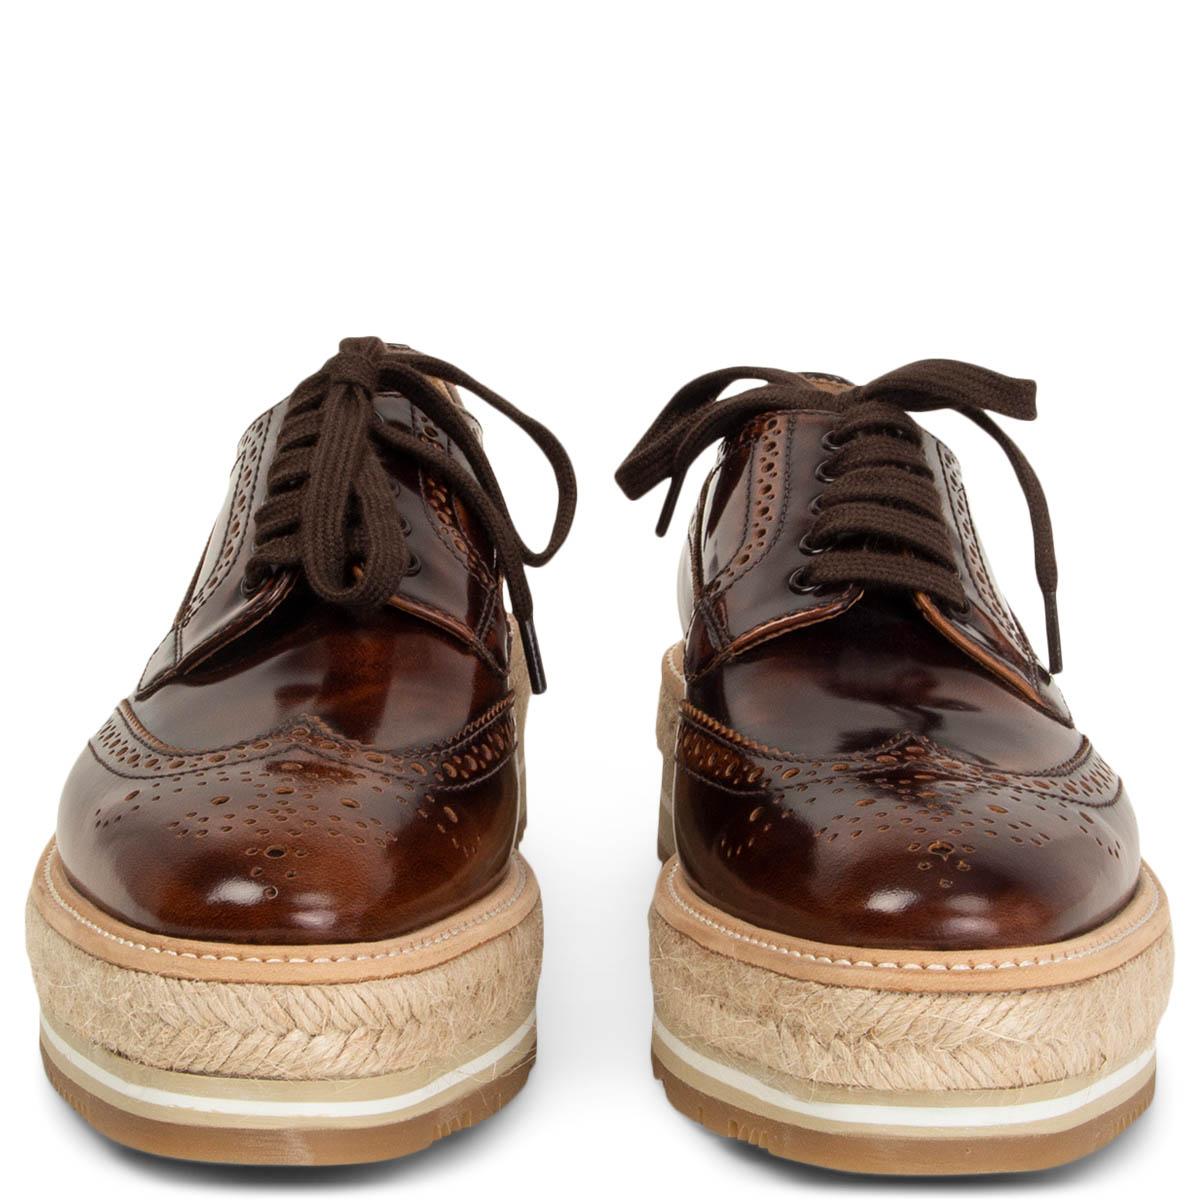 100% authentic Prada platform brogues in brown calfskin with a varnished finish on a beige raffia flat platform sole.  Featuring a braided raffia sole, a lace-up front fastening, a round toe and rubber sole. Brand new.

Measurements
Imprinted